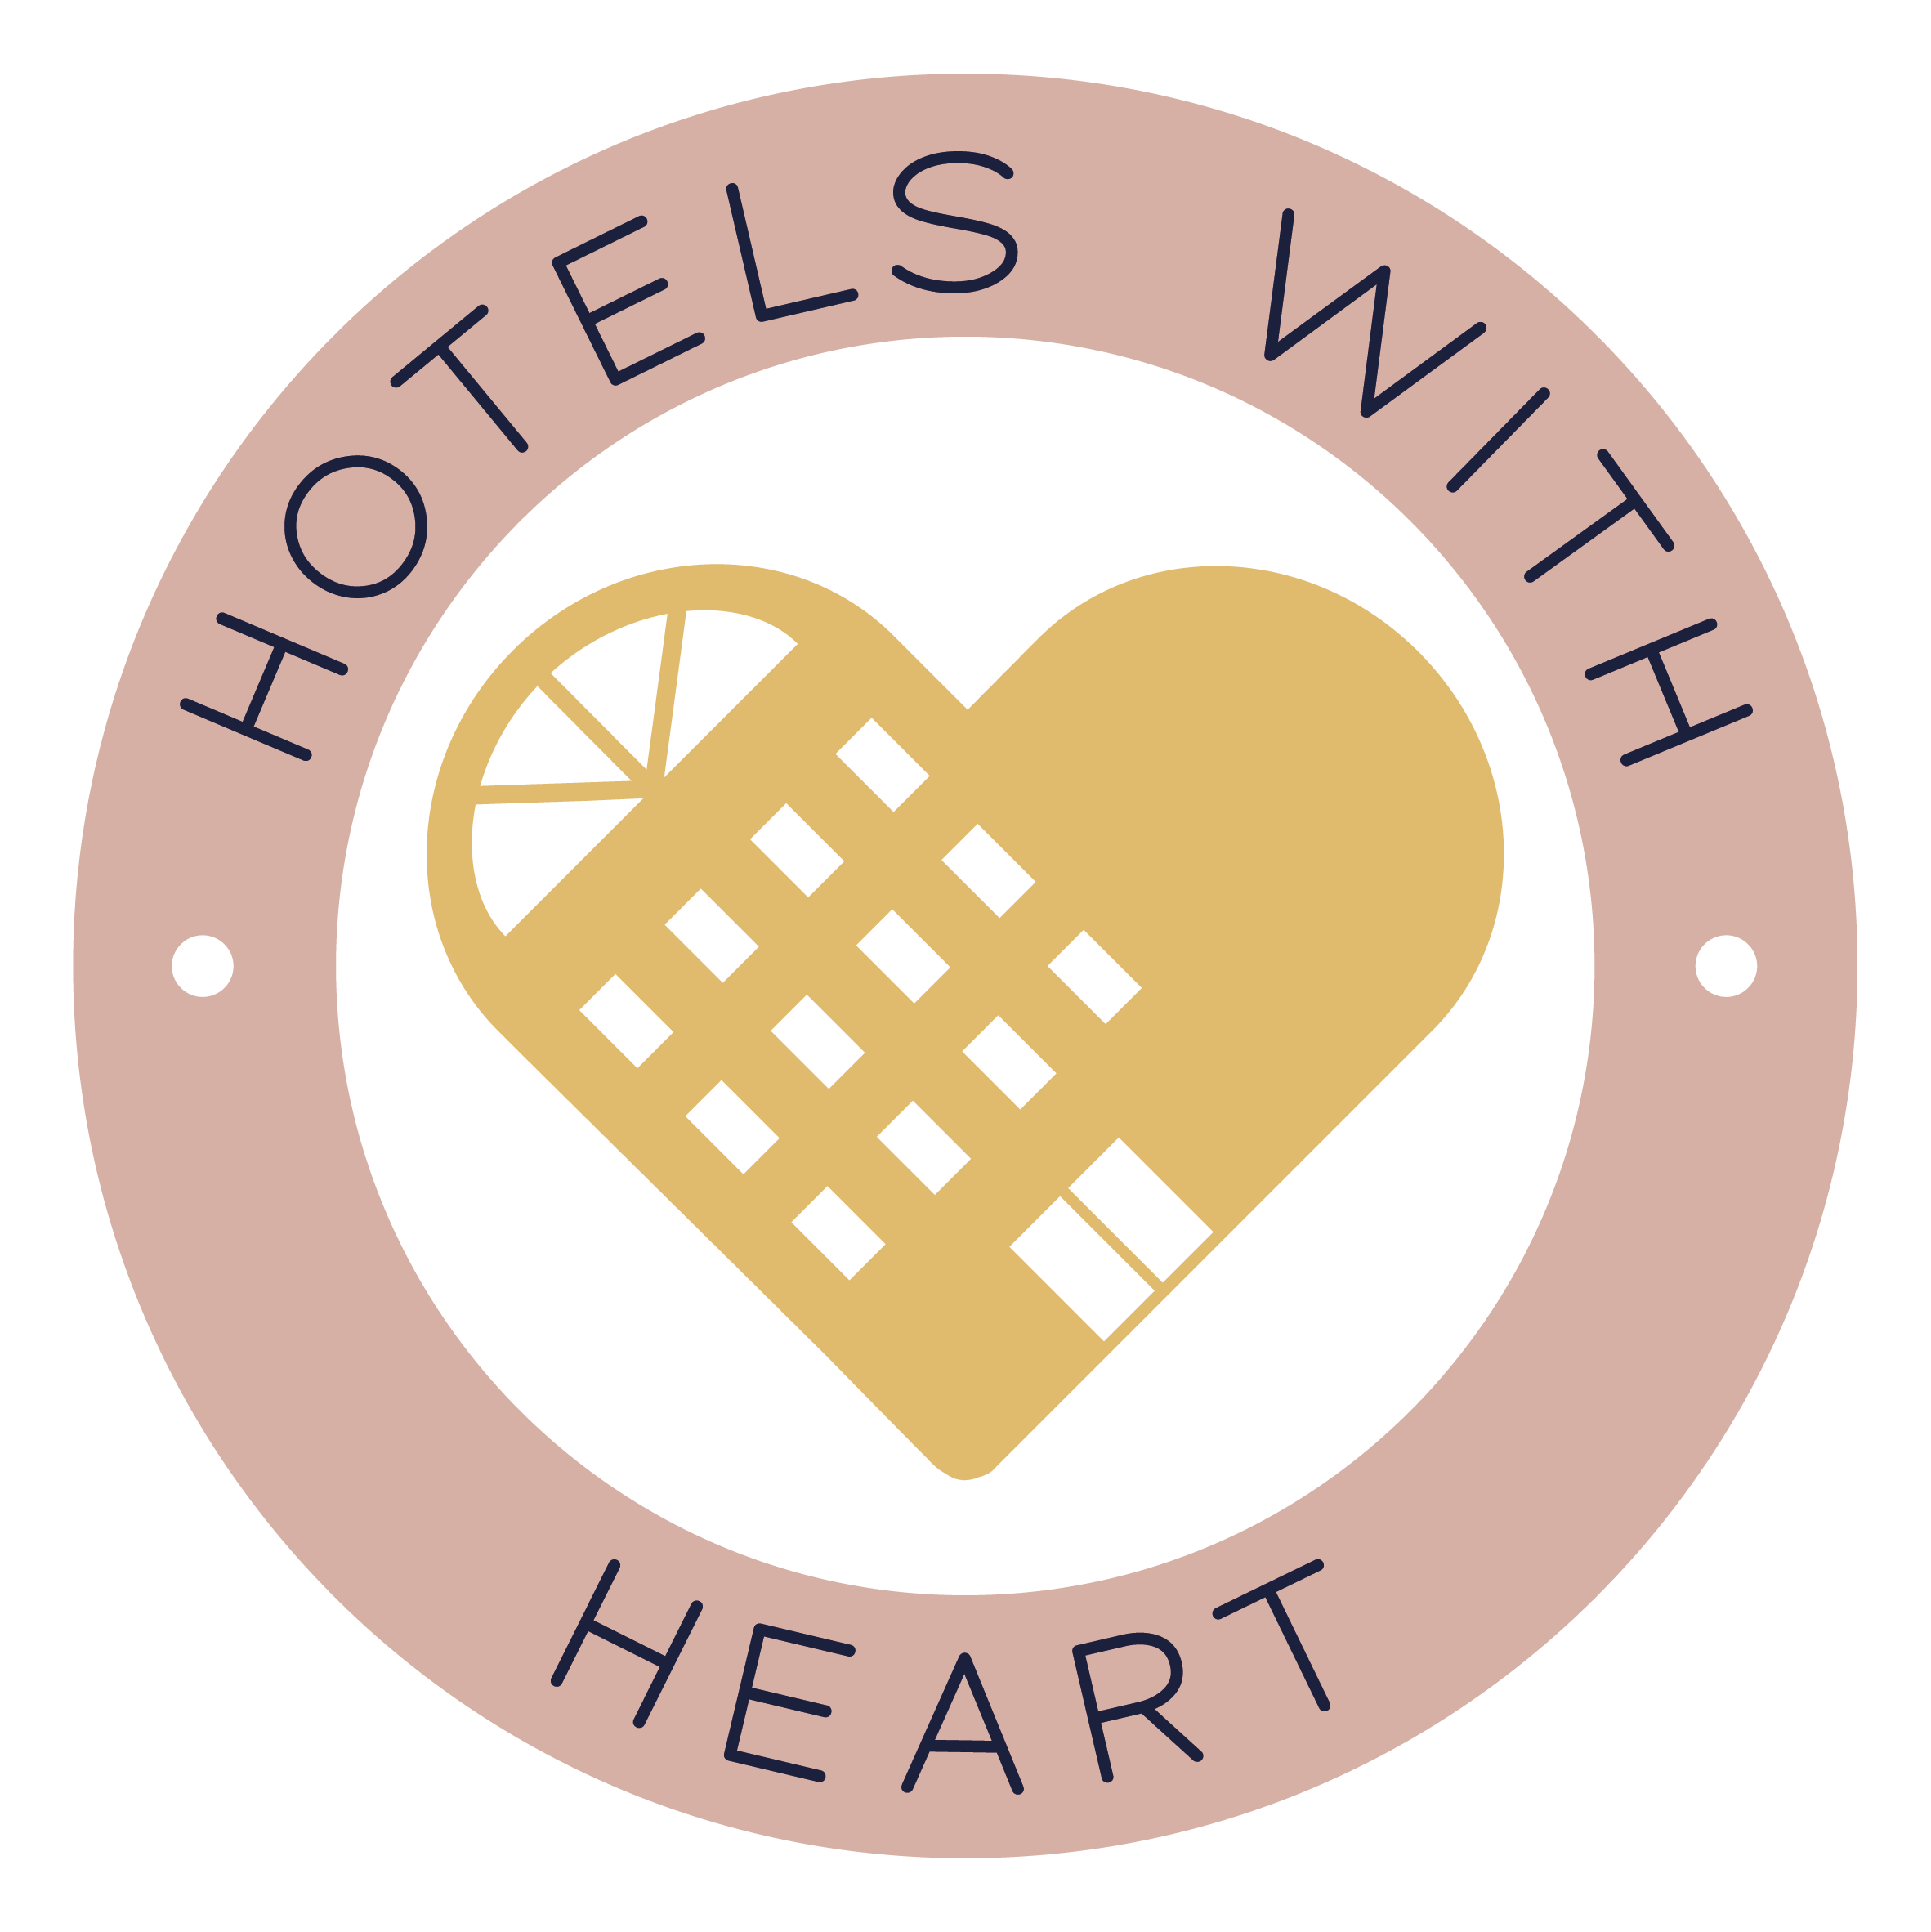 Hotels with Heart logo